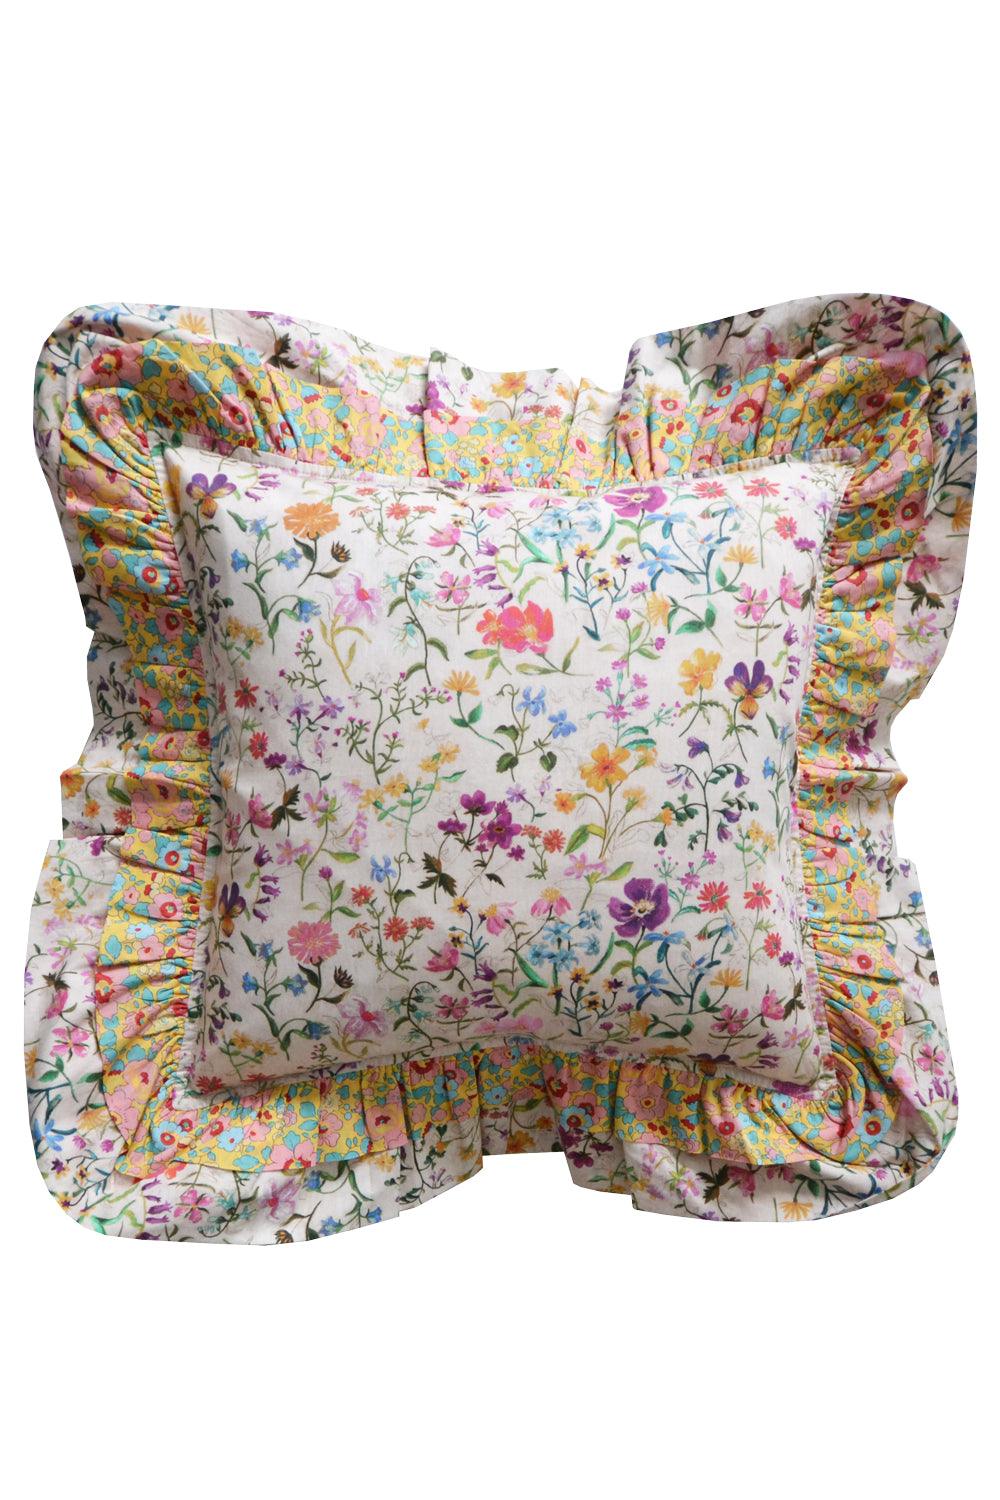 Double Ruffle Cushion made with Liberty Fabric LINEN GARDEN - Coco & Wolf